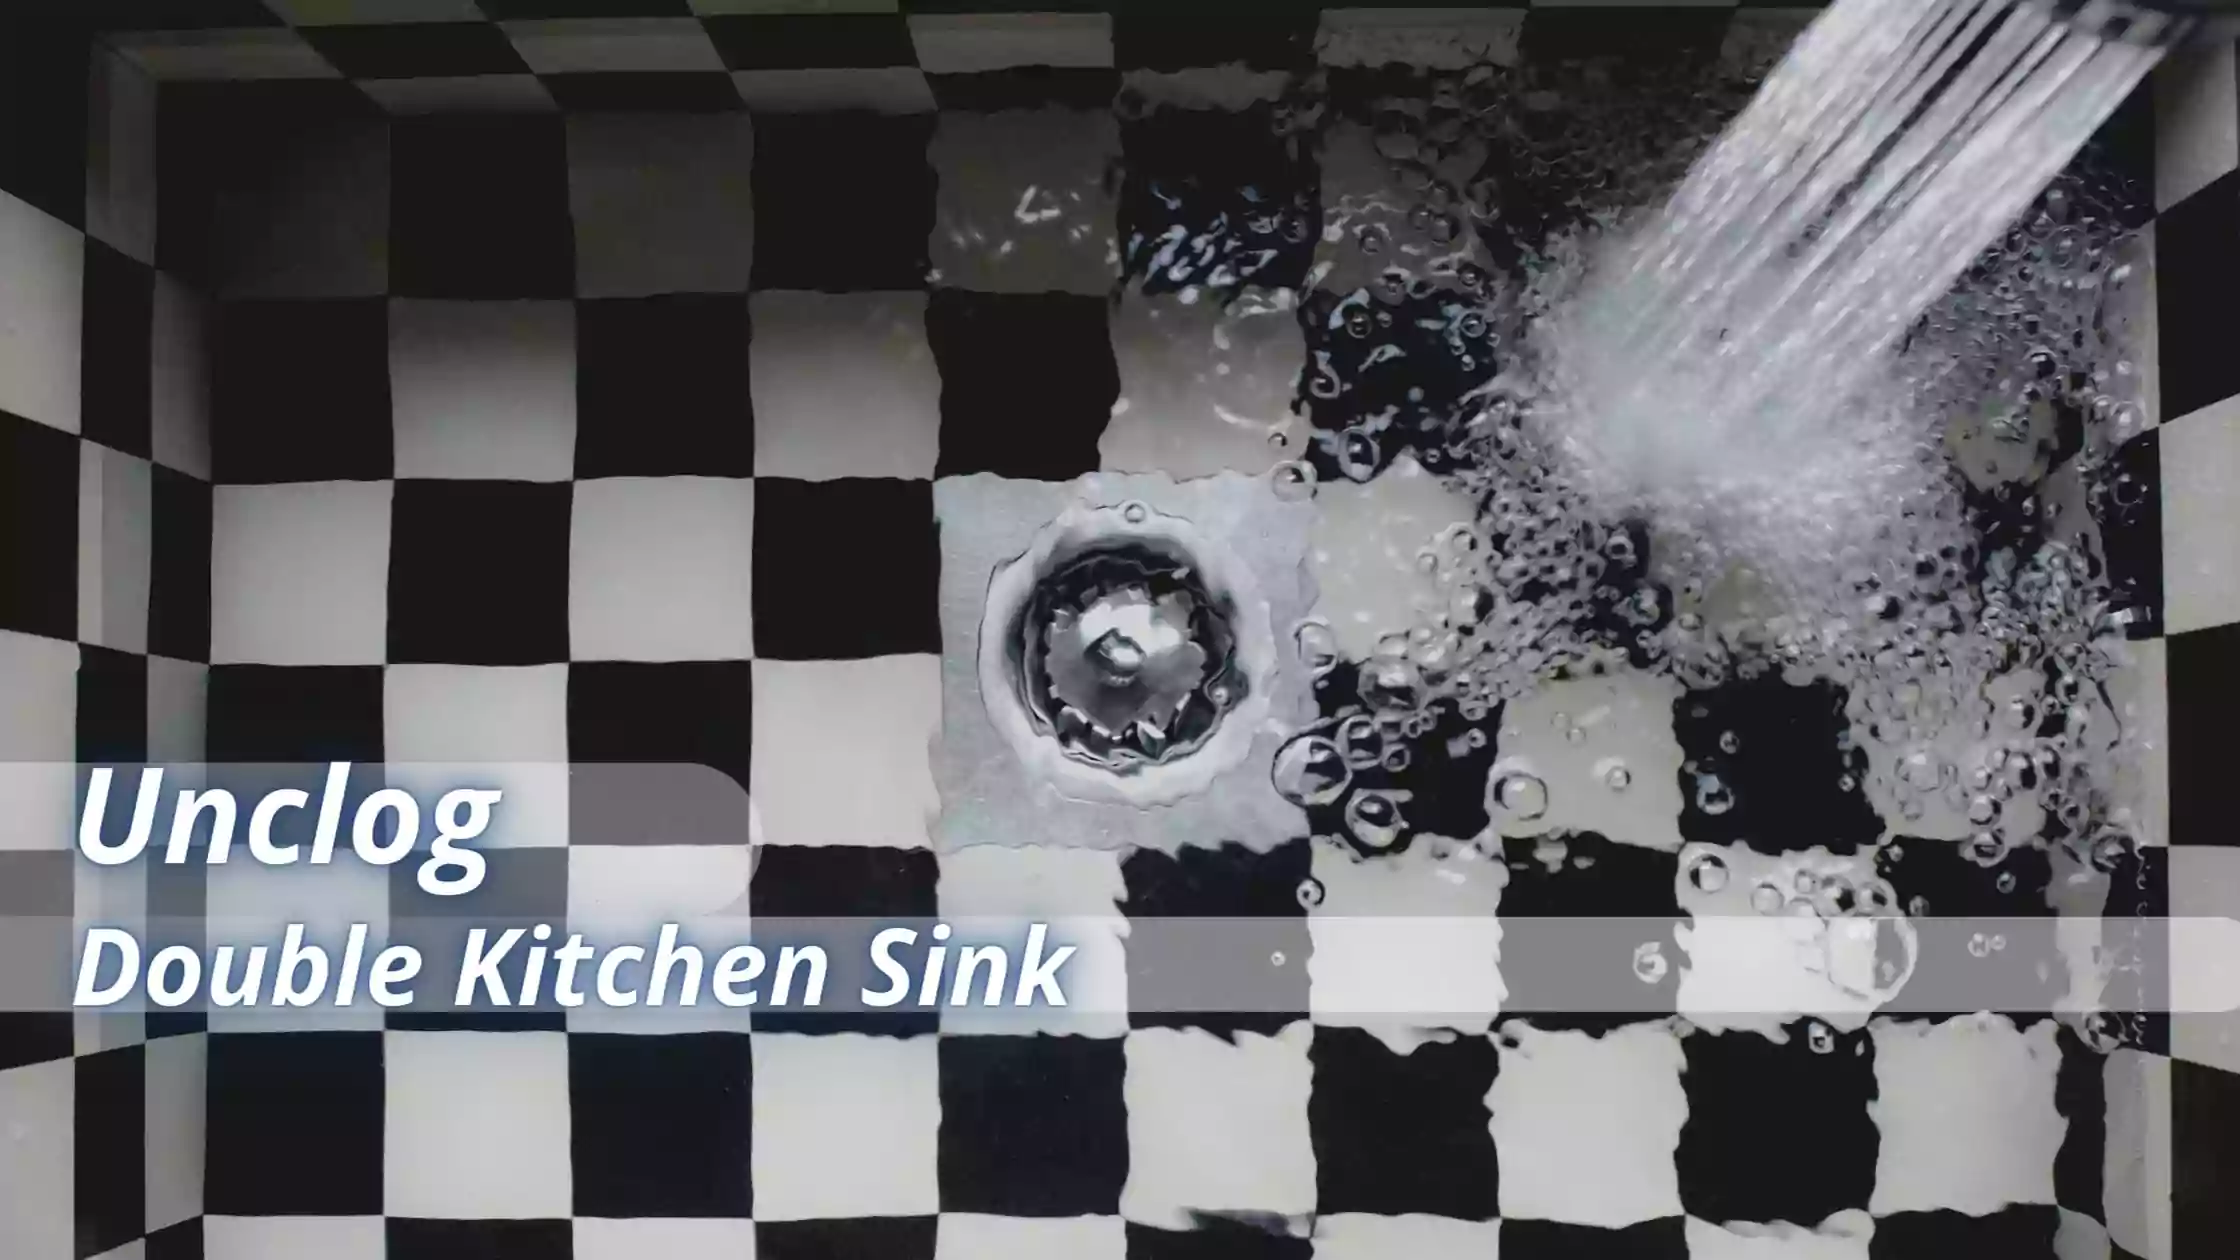 How to unclog a double kitchen sink with standing water?